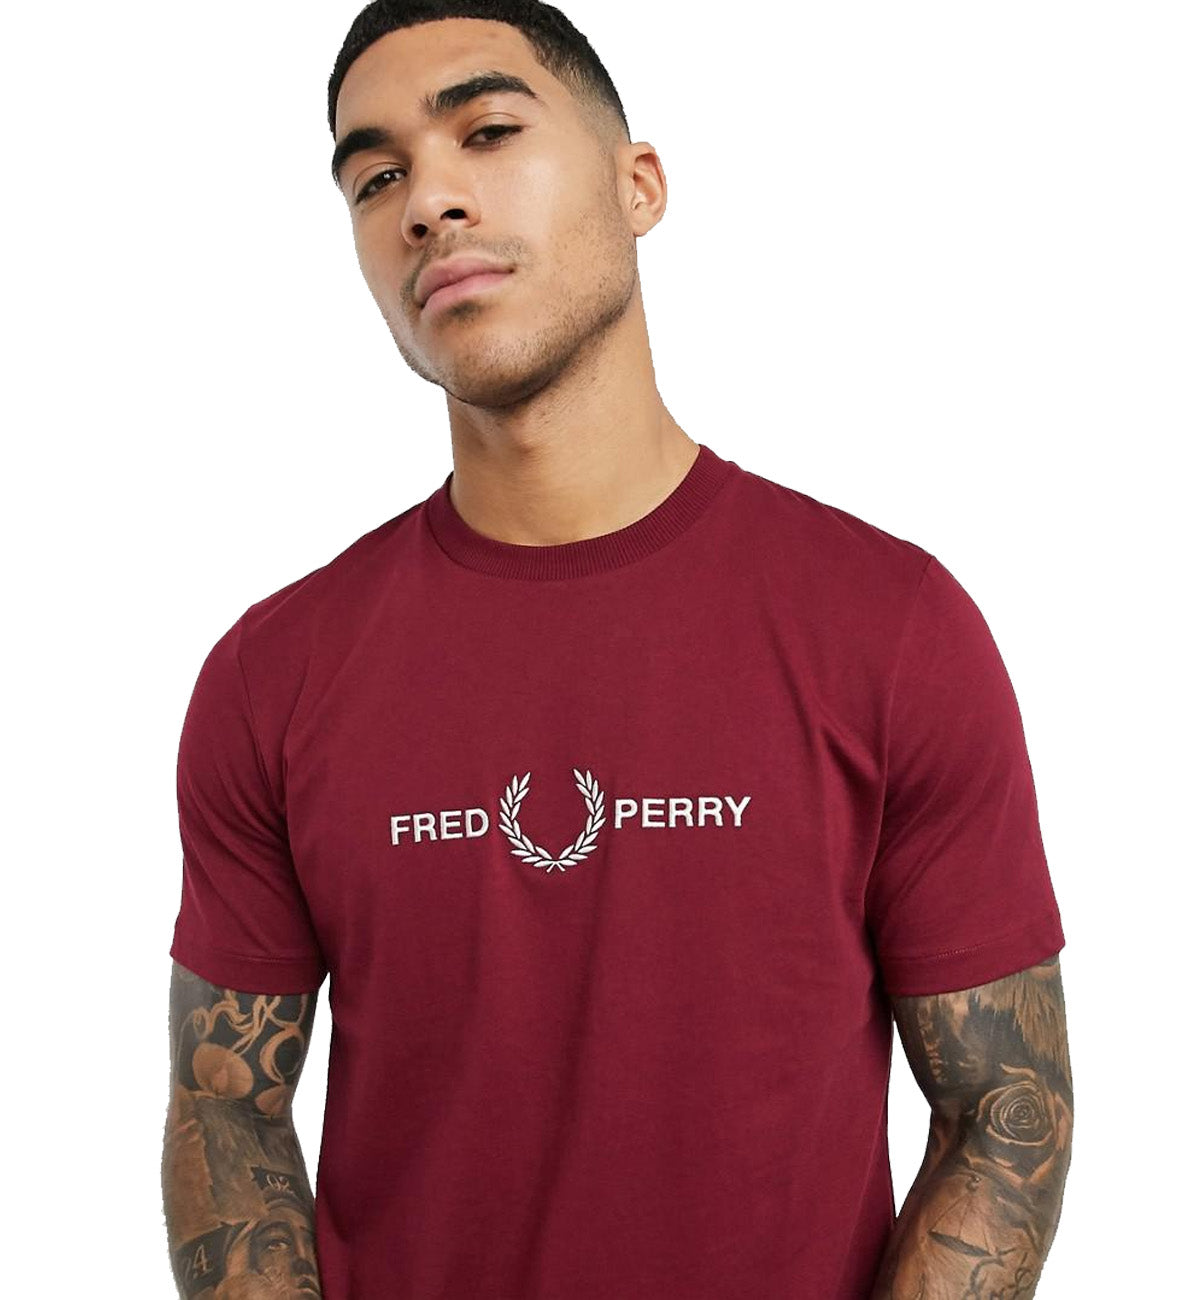 Fred Perry Signature Logo T-Shirt (Maroon)